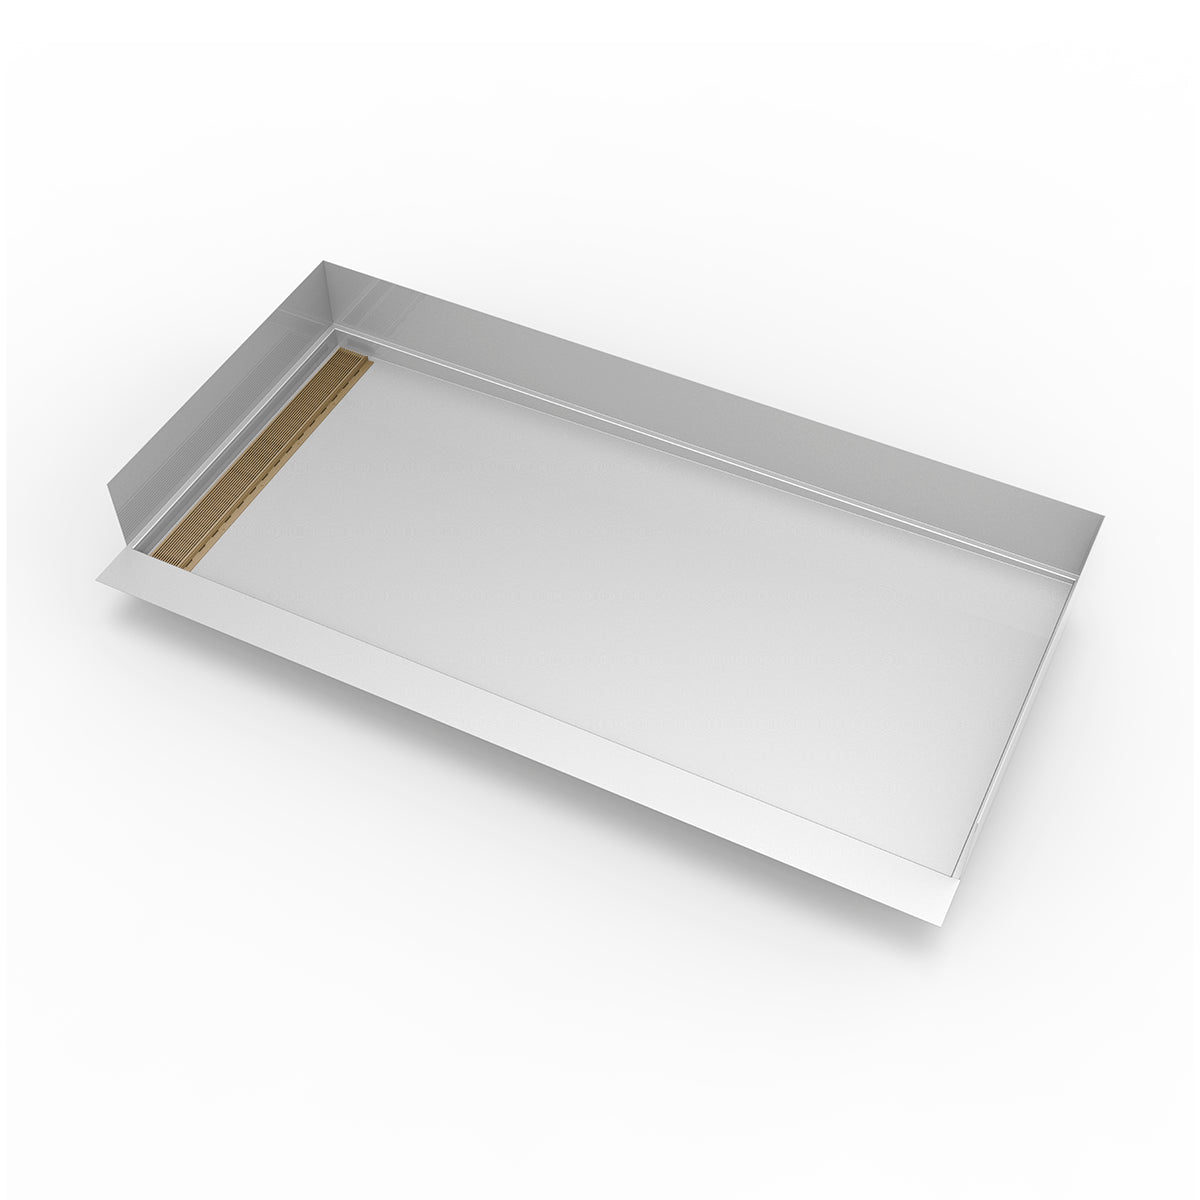 Infinity Drain 30"x 60" Curbless Stainless Steel Shower Base with Left Wall Wedge Wire Linear Drain location